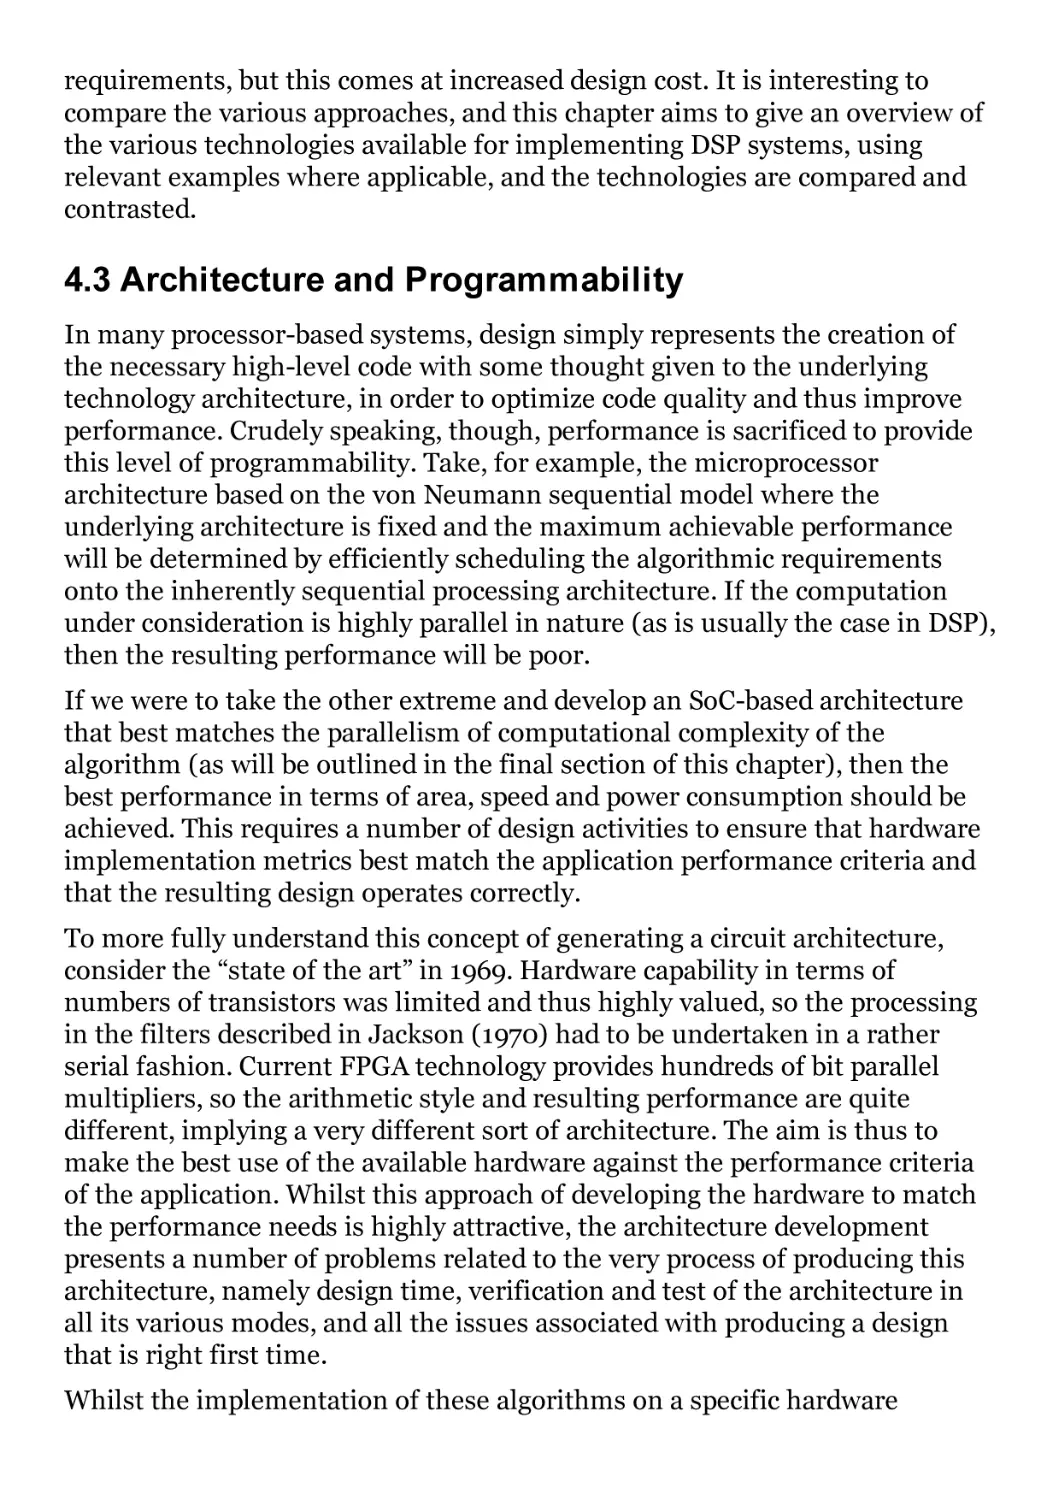 4.3 Architecture and Programmability